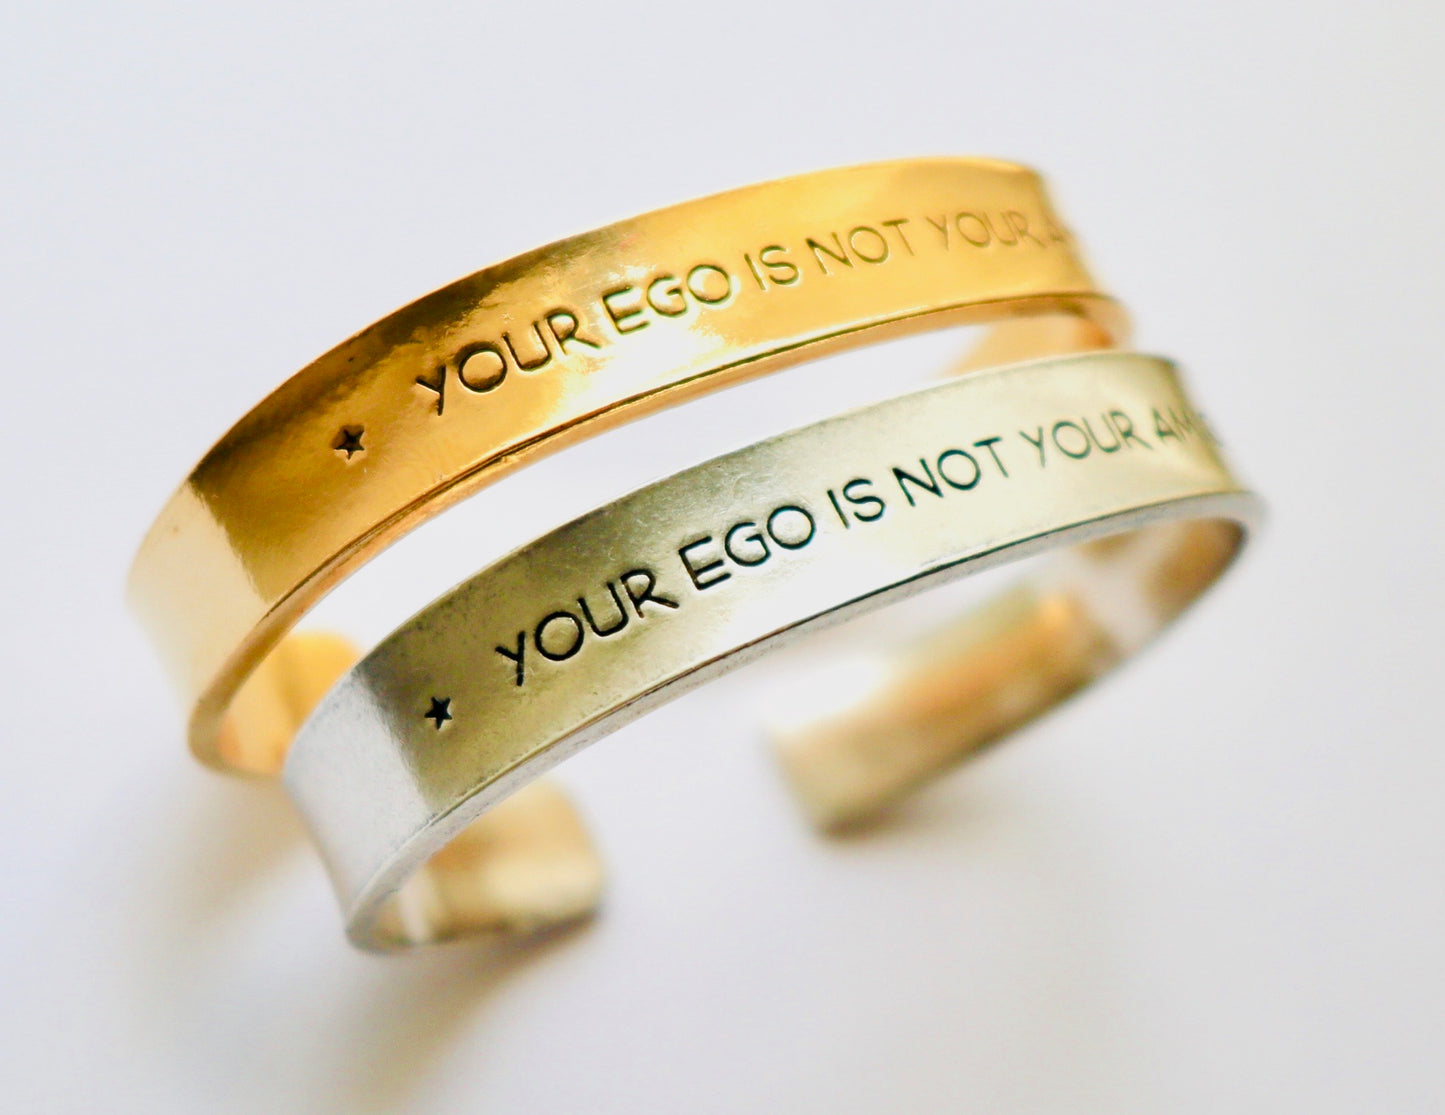 Your Ego is Not your Amigo Hand Stamped Cuff Bracelet